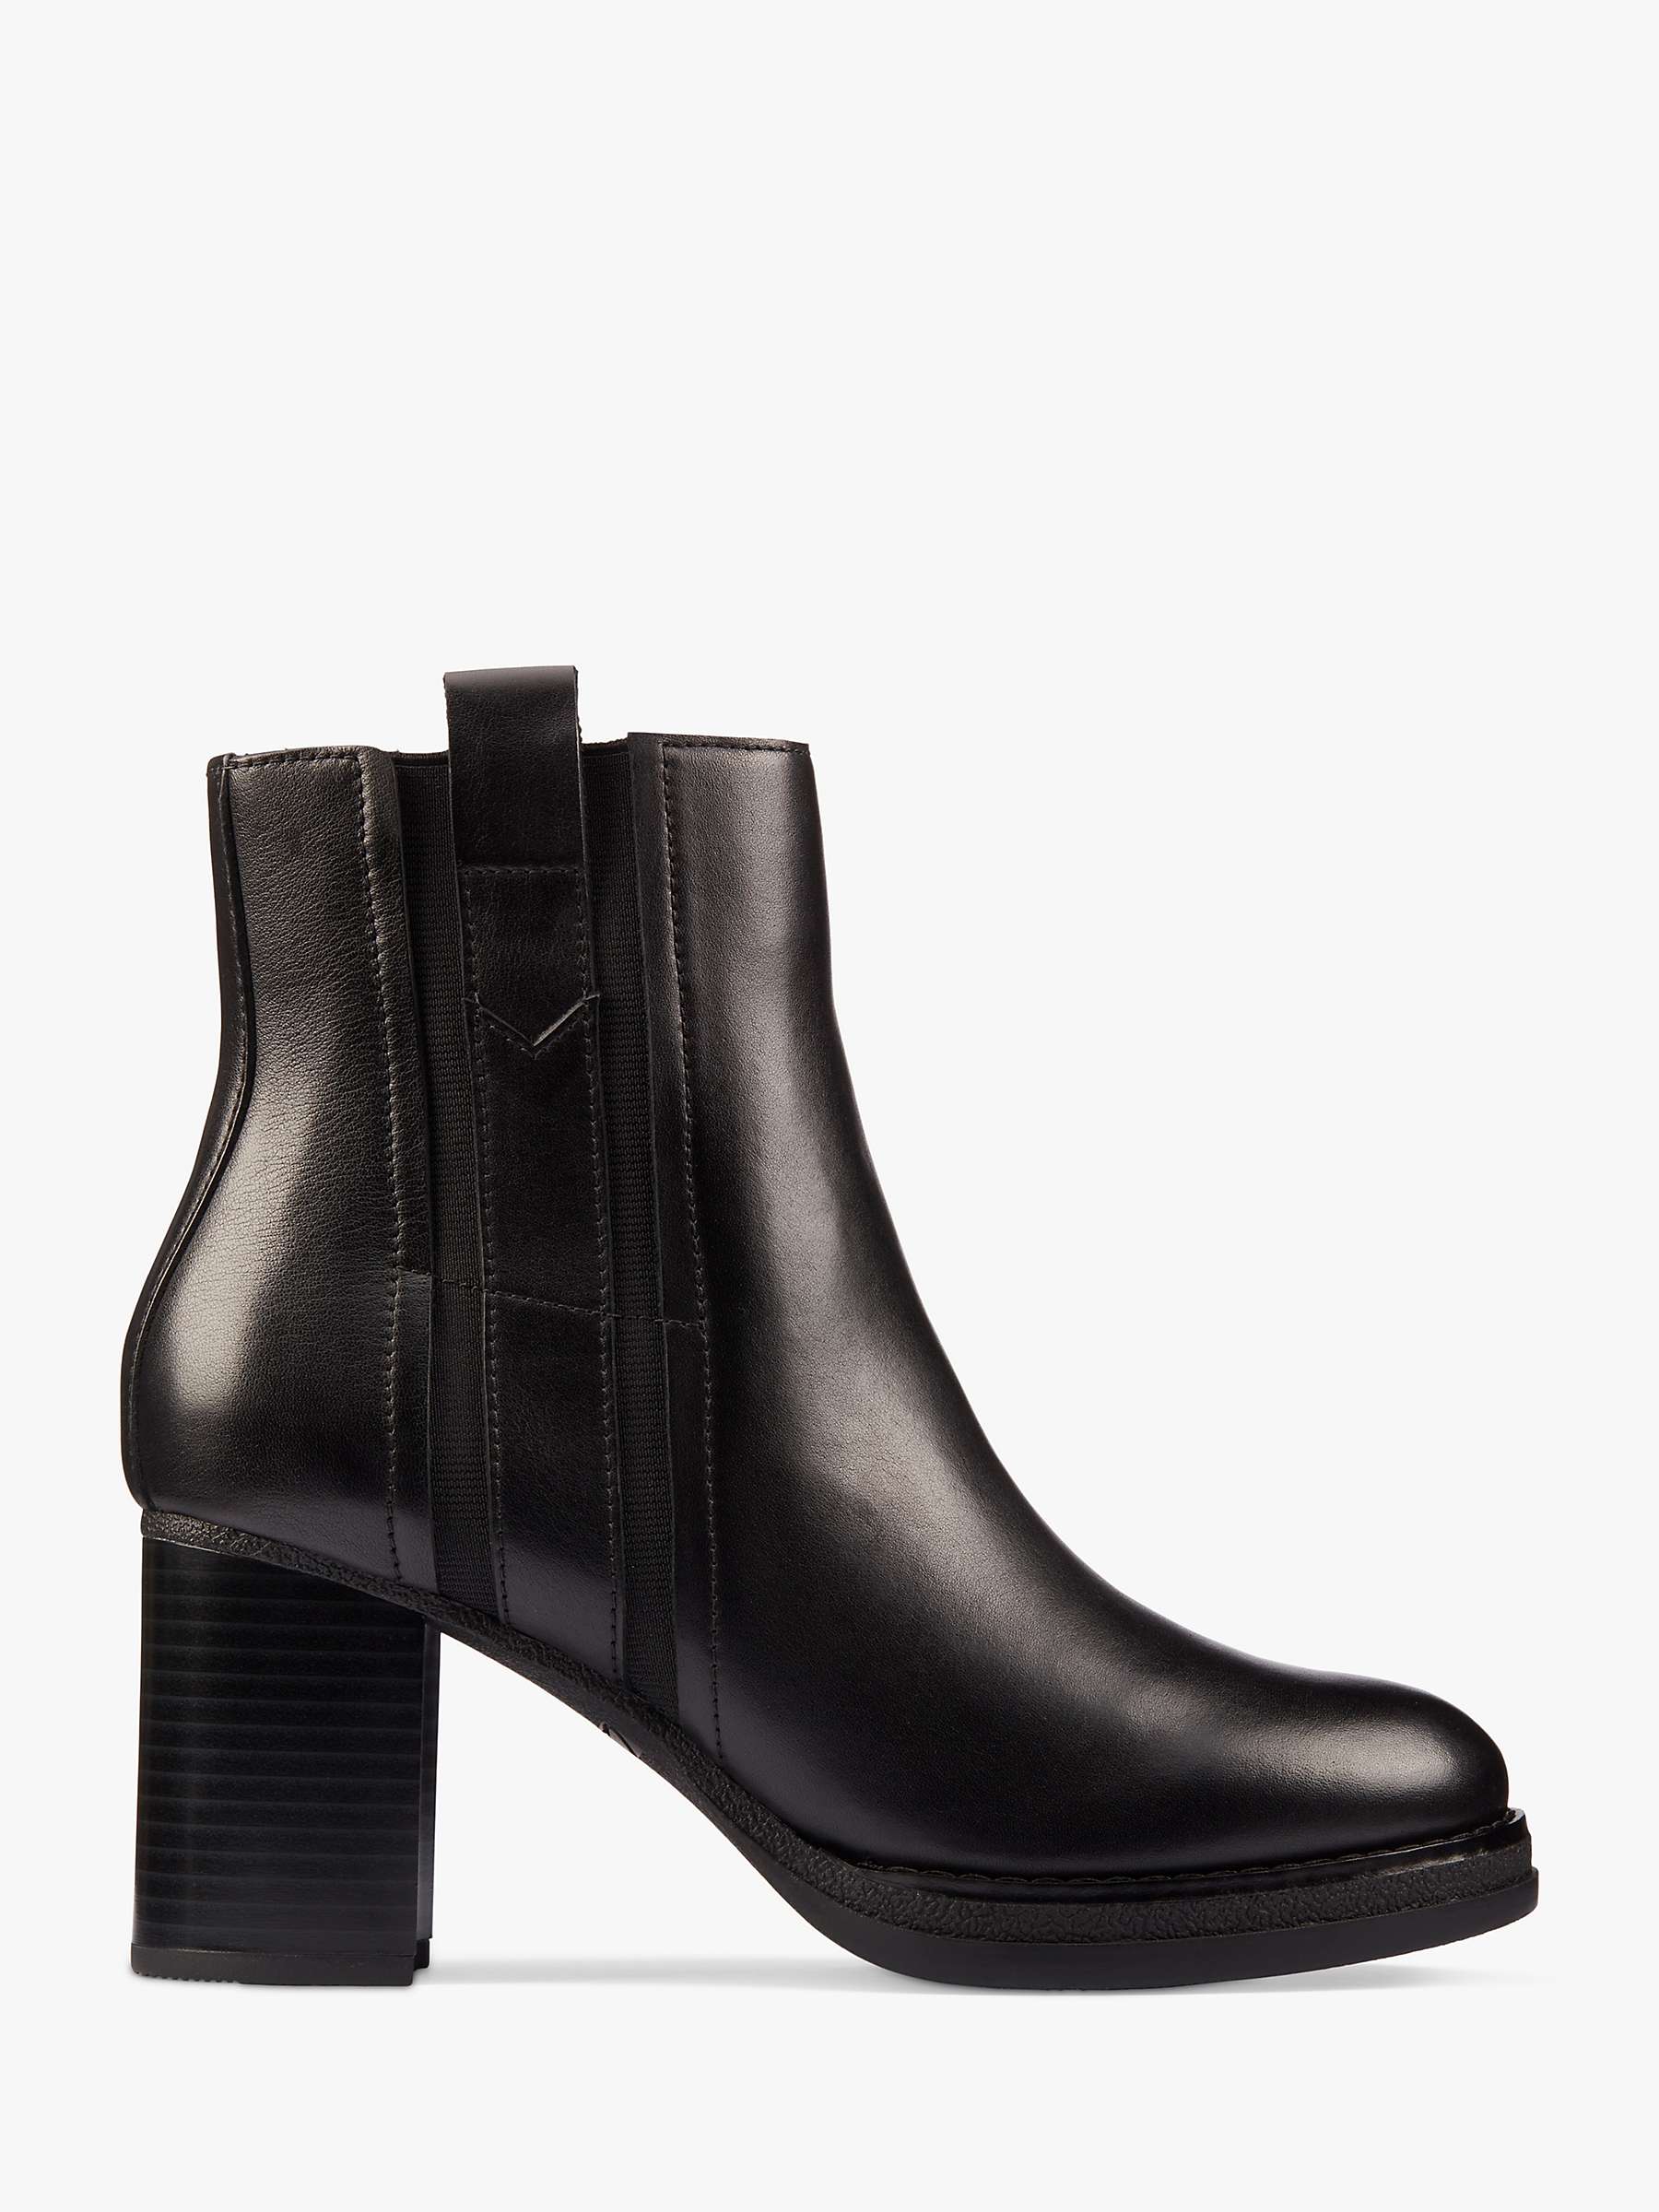 Clarks Mable Easy Leather Ankle Boots, Black at John Lewis & Partners